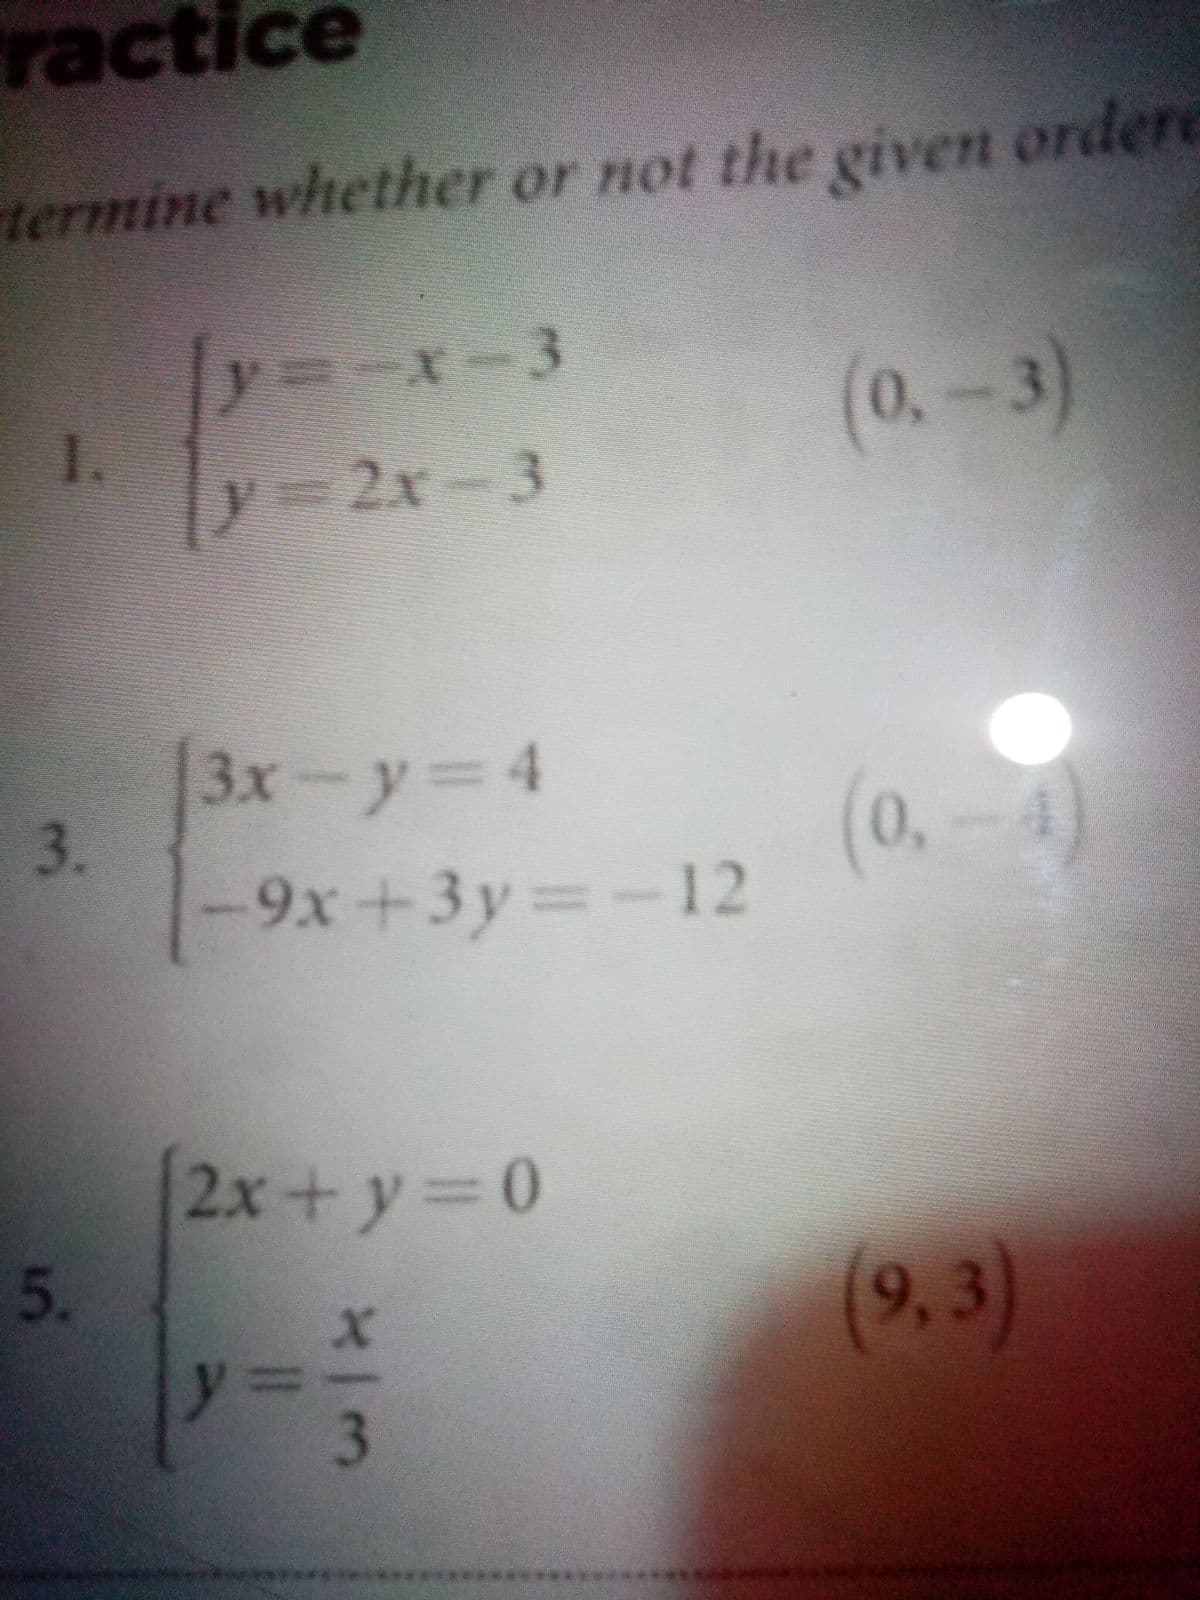 ractice
termine whether or not the given ordere
y=-x-3
1.
(0.-3)
y=2x-3
3x-y 4
3.
-9x+3y -12
(0,-4
2x+y D0
5.
9,3
3
